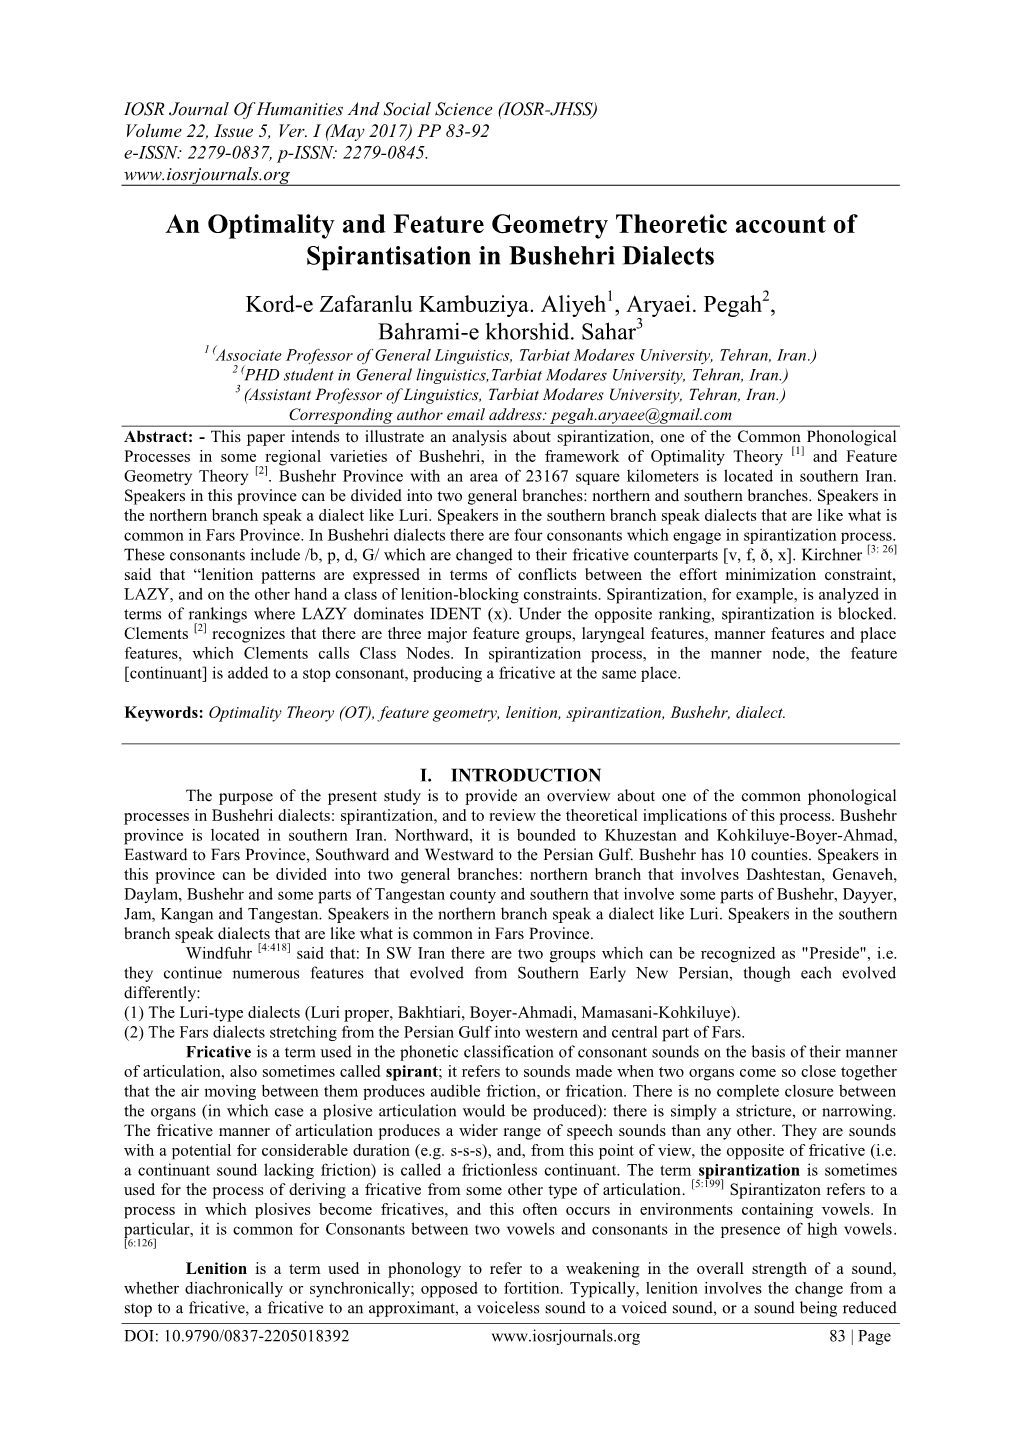 An Optimality and Feature Geometry Theoretic Account of Spirantisation in Bushehri Dialects